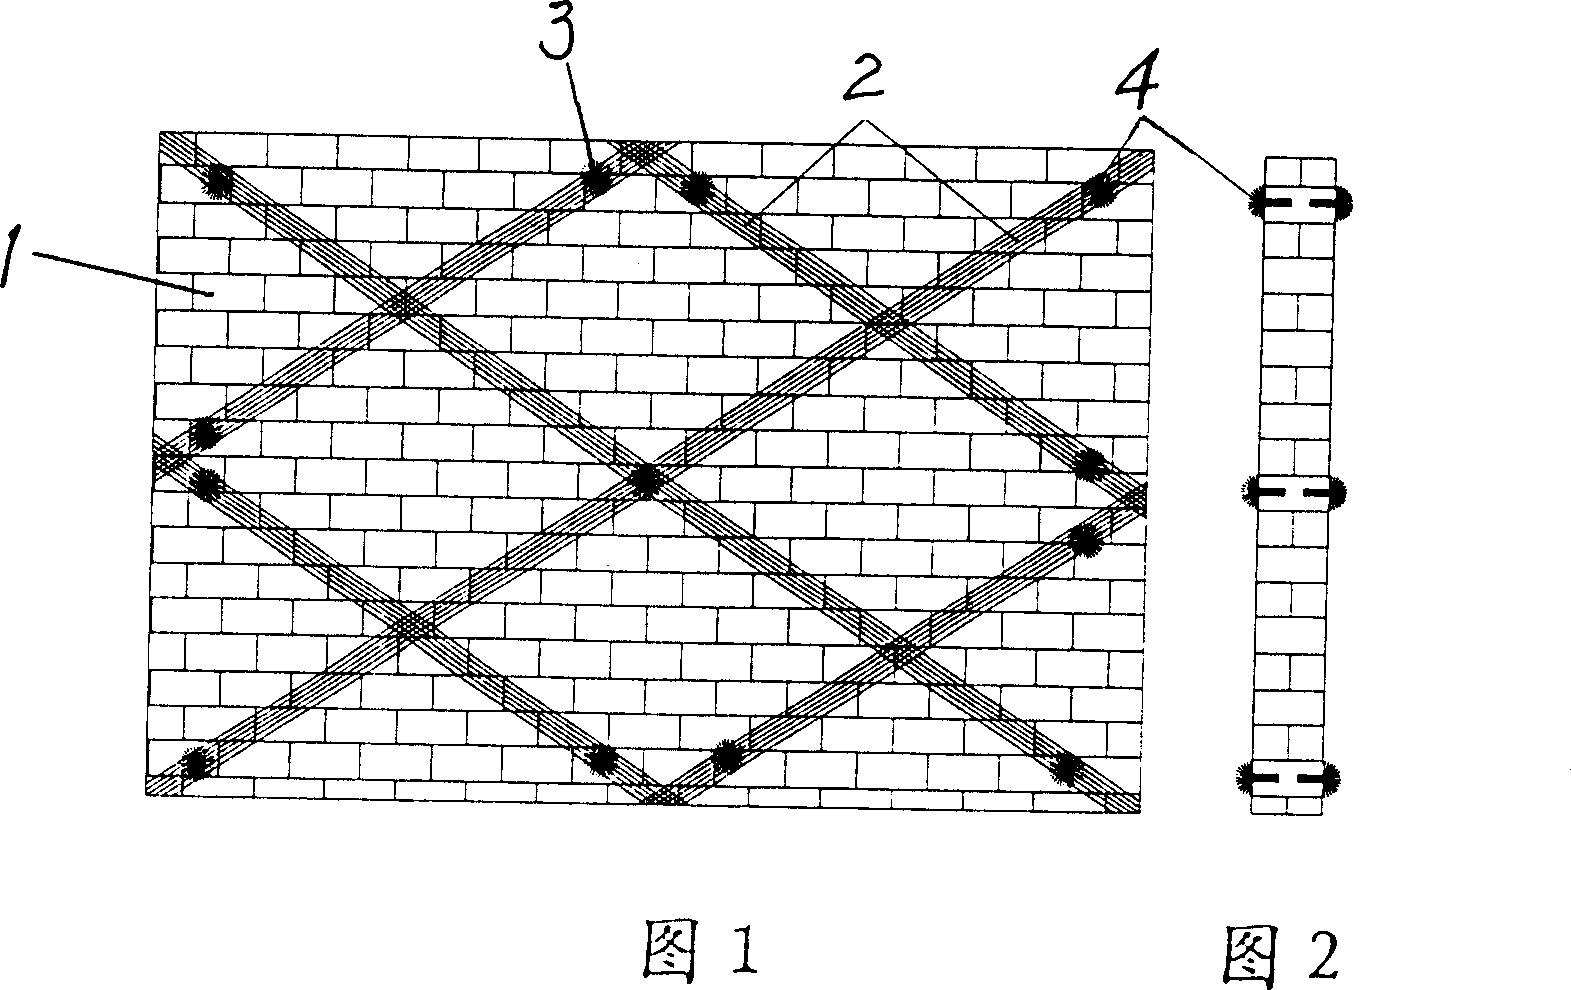 Method of reinforcing masonry with fibrous fabric and matched clasping device